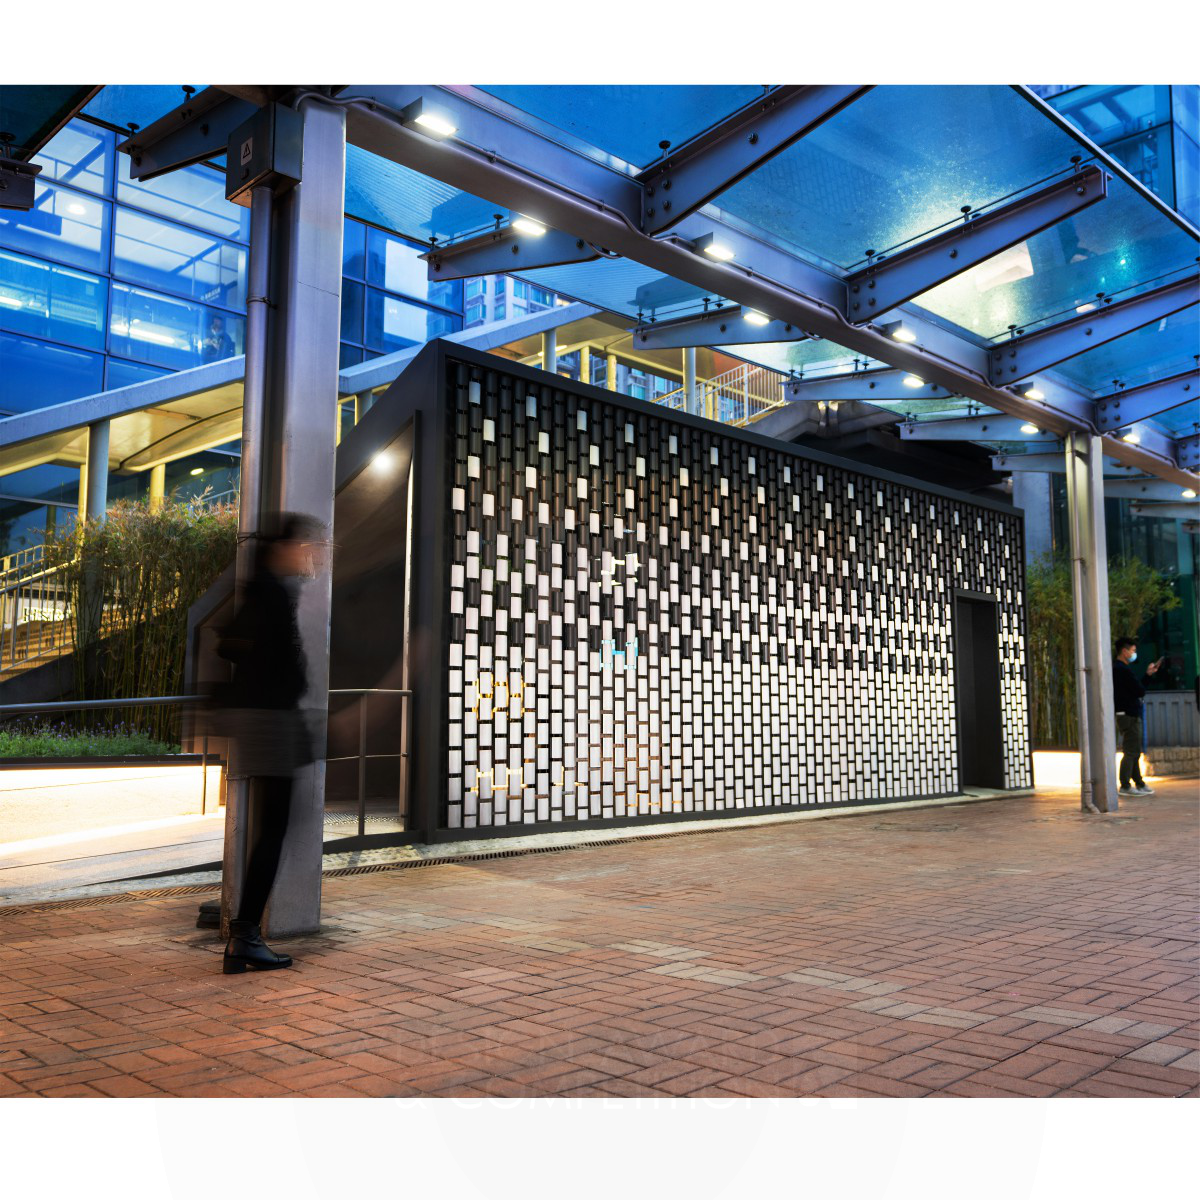 Knowledge Shed Library Station  by Architectural Services Department